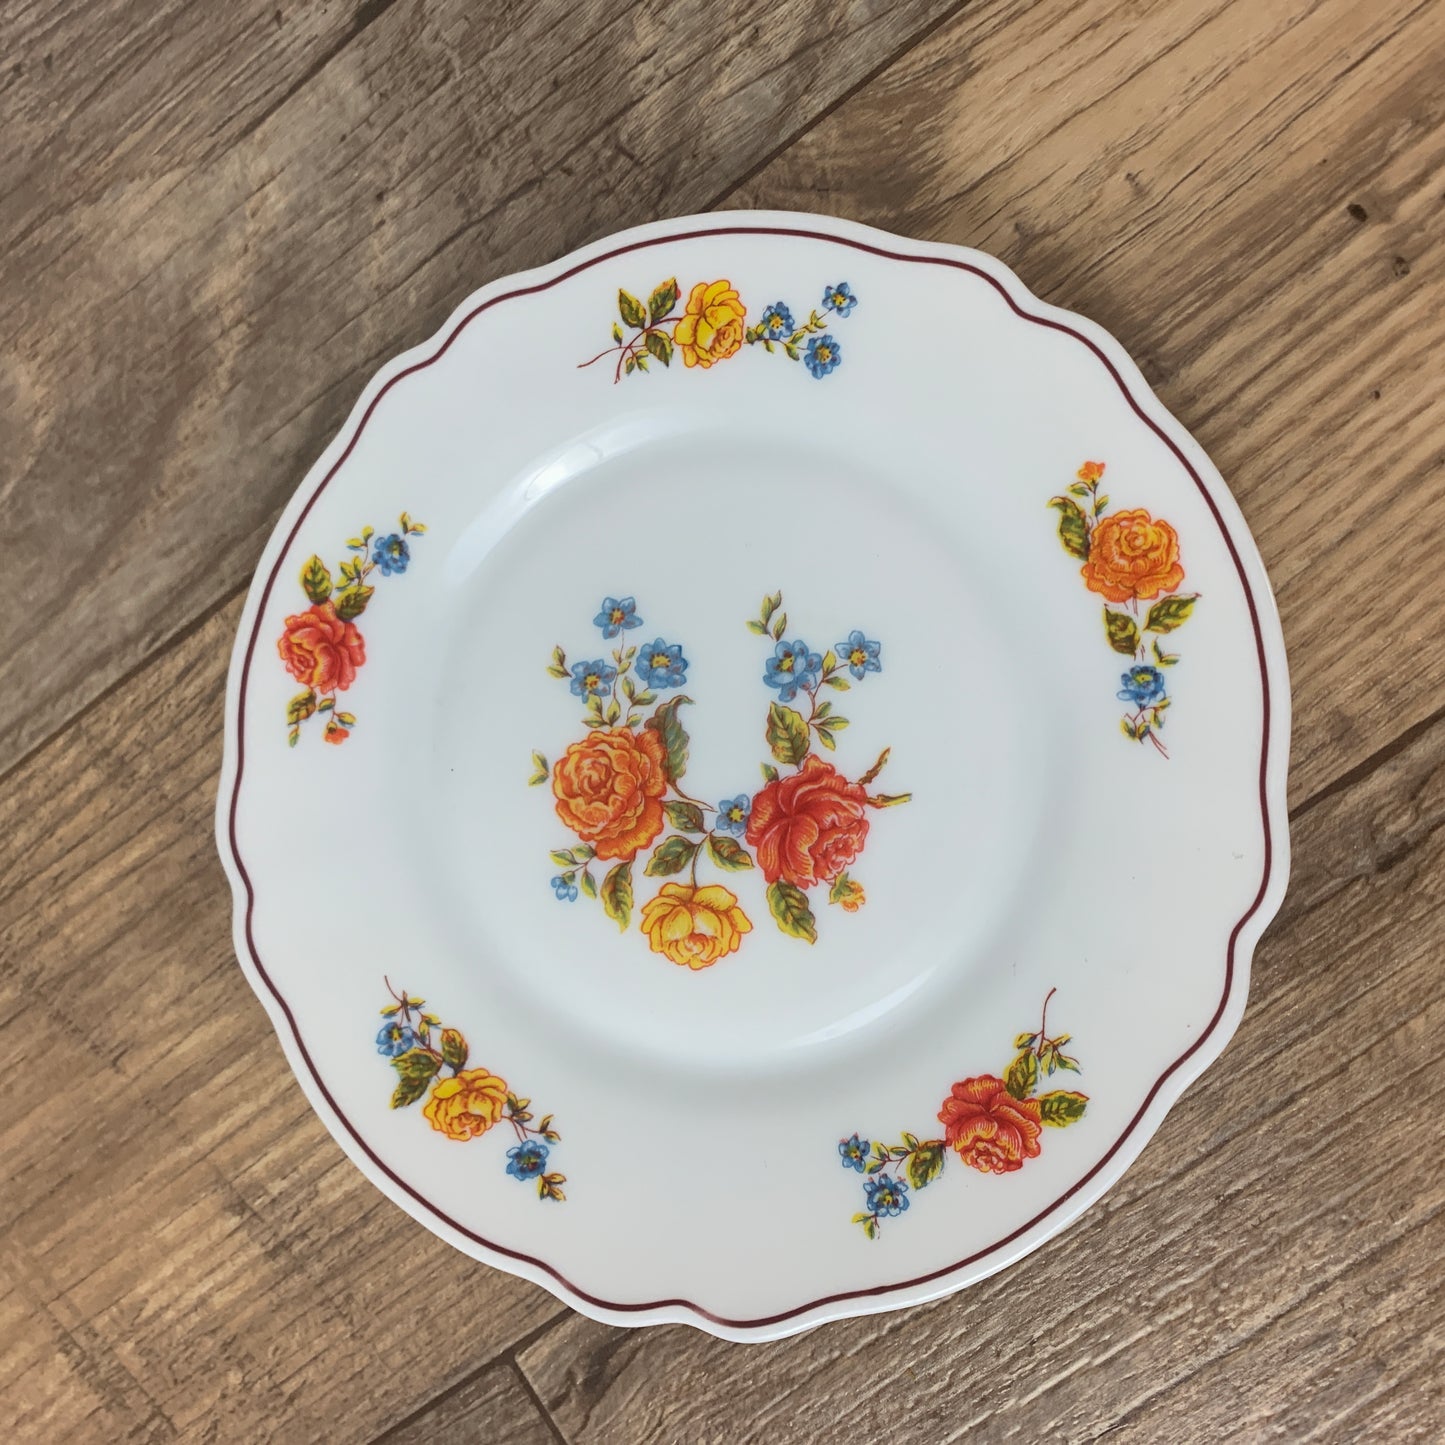 Acropal France 7.5" Salad Plate Milk Glass Plate with Orange and Blue Floral Pattern